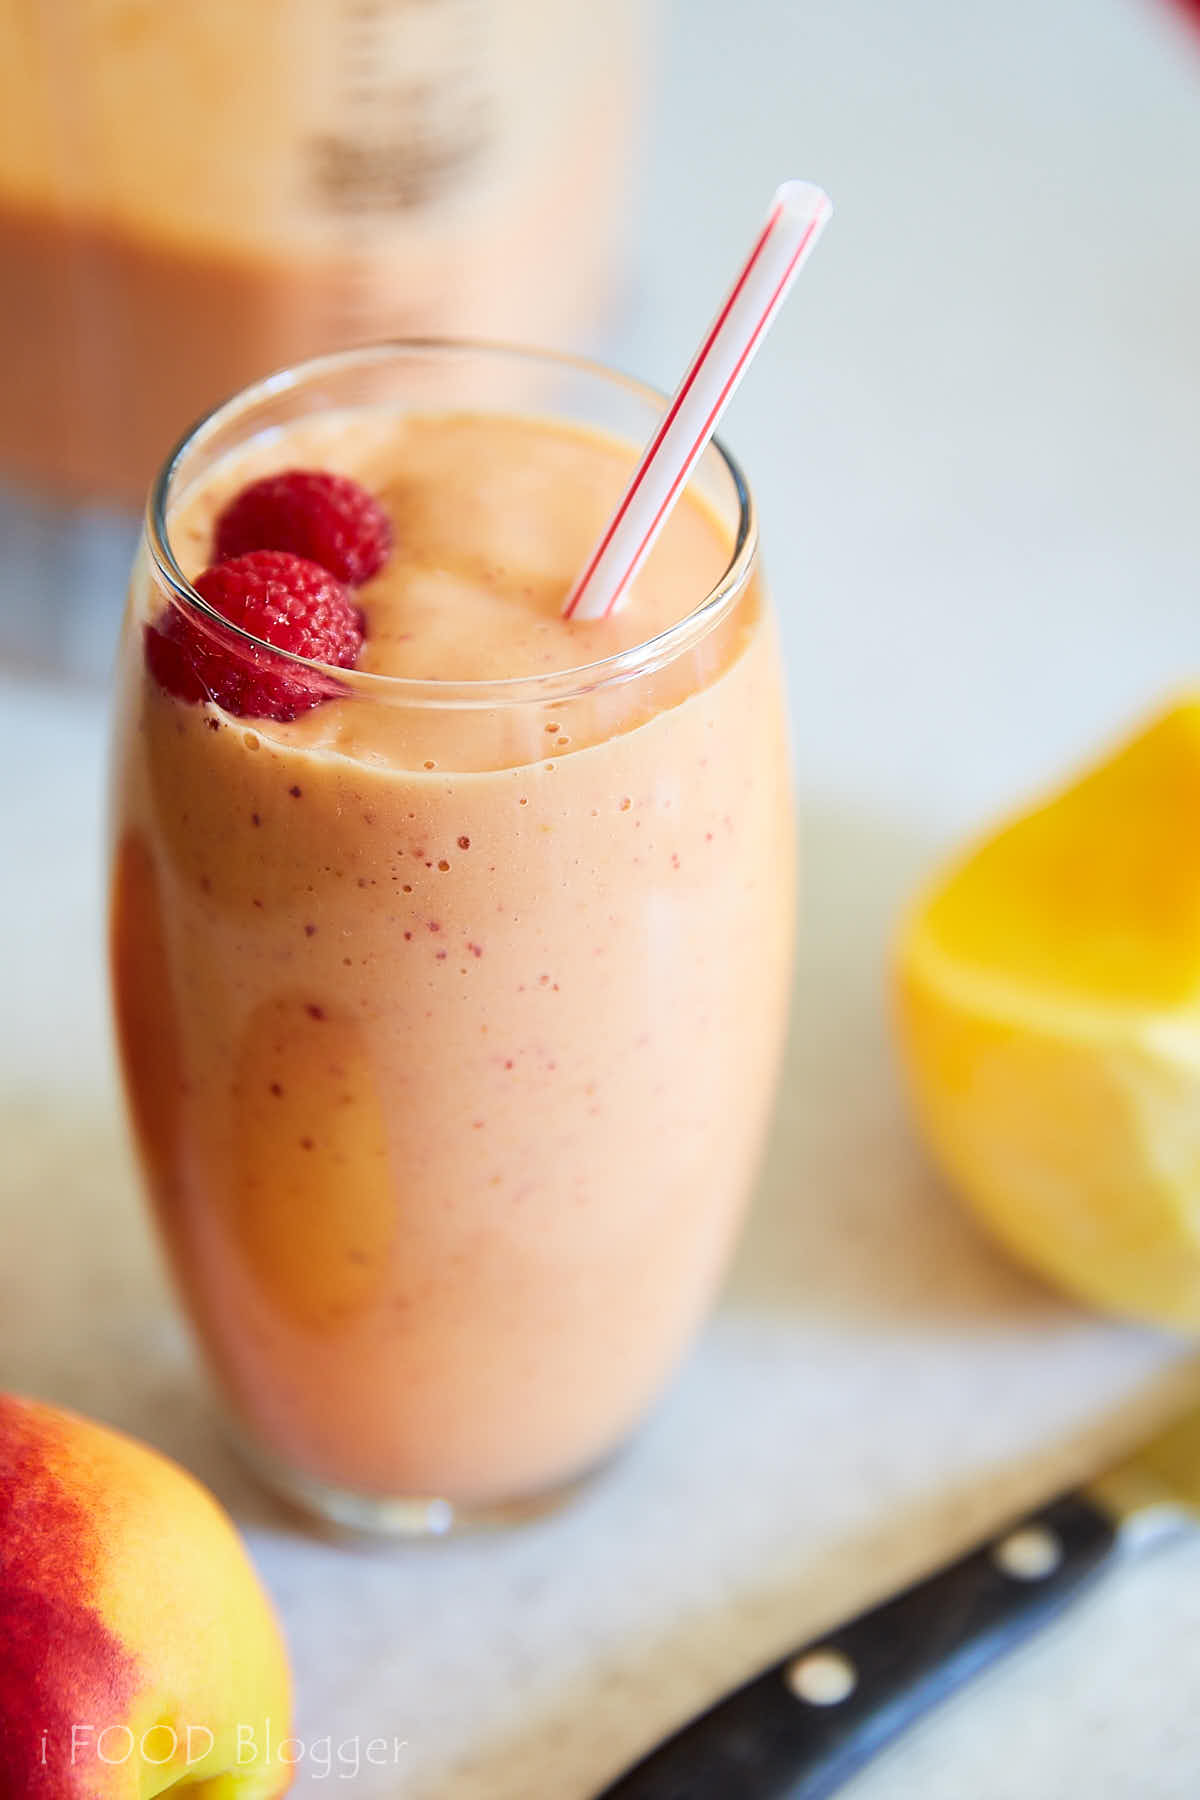 Peach Smoothie with Raspberries and Mango - i FOOD Blogger